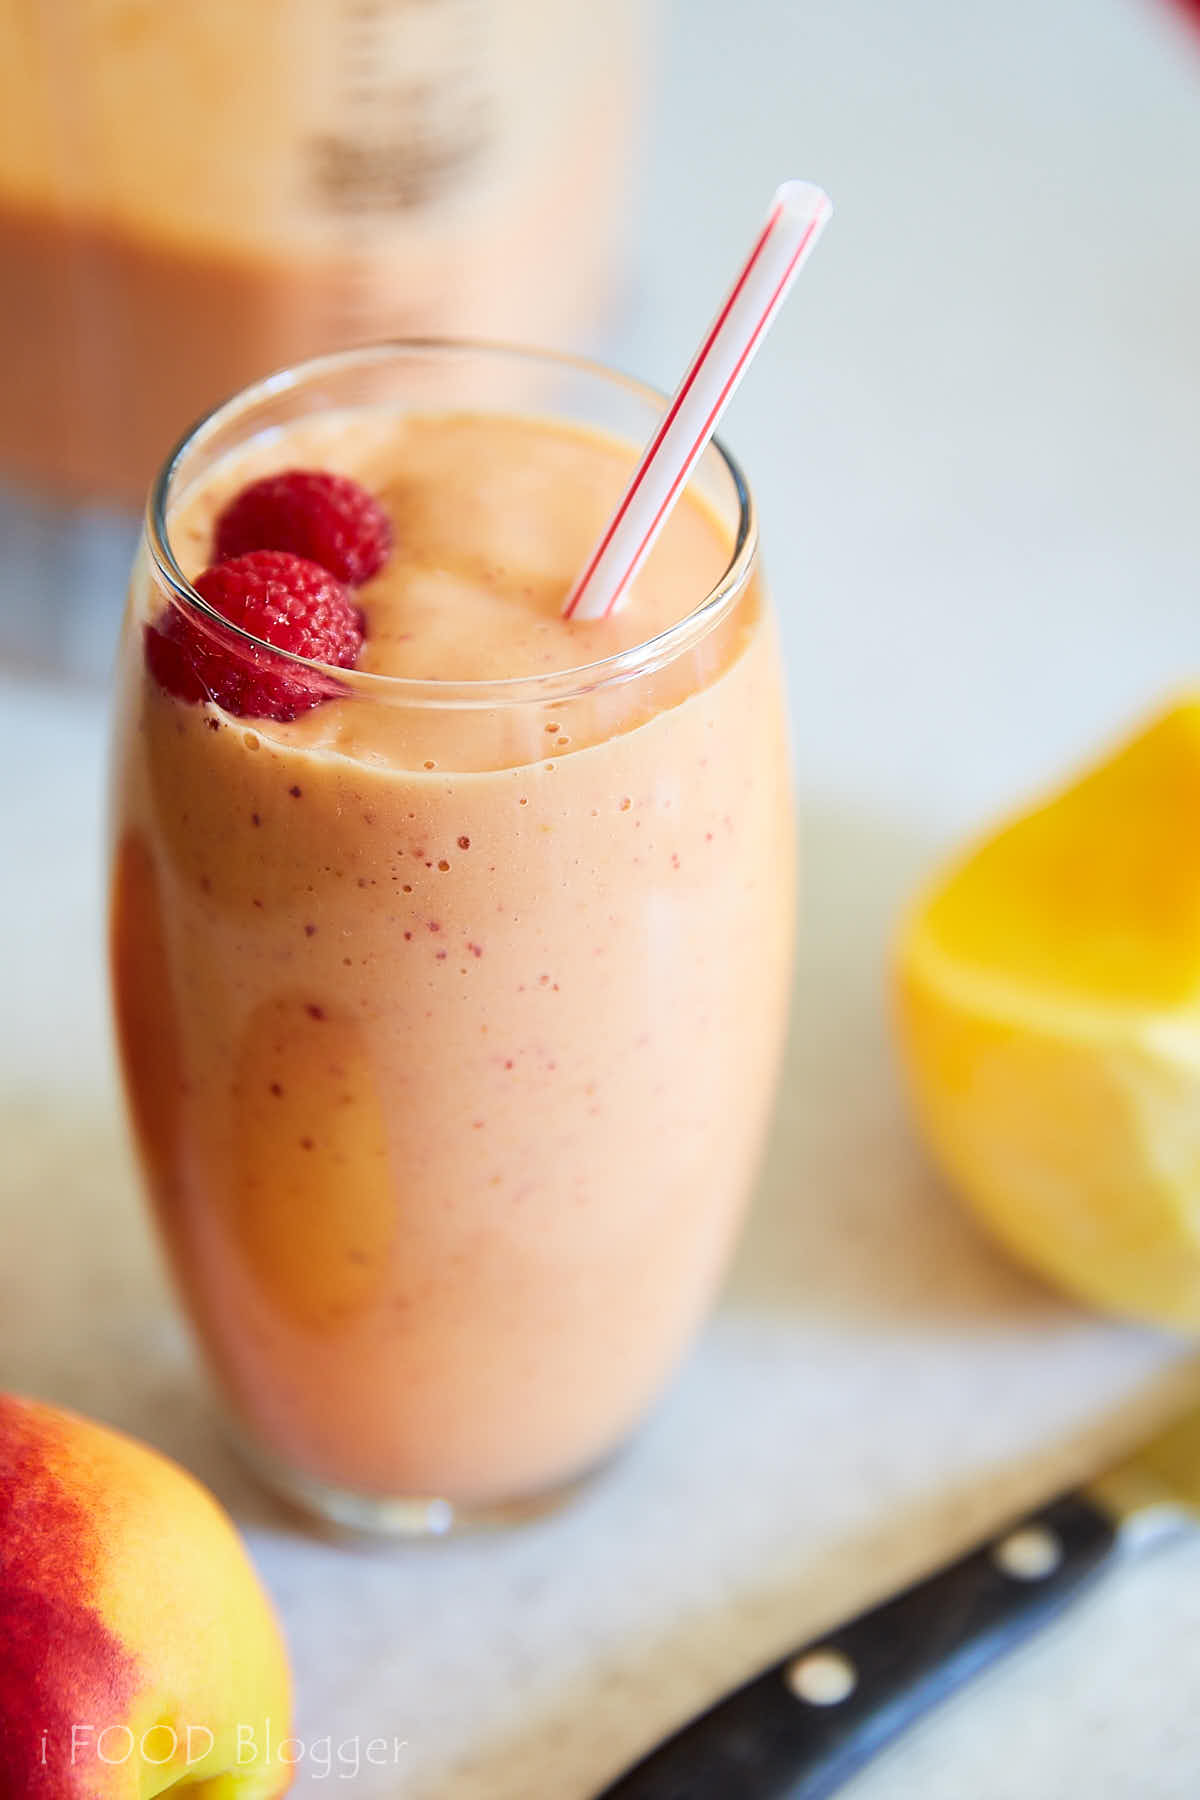 Peach Smoothie with Raspberries and Mango - i FOOD Blogger